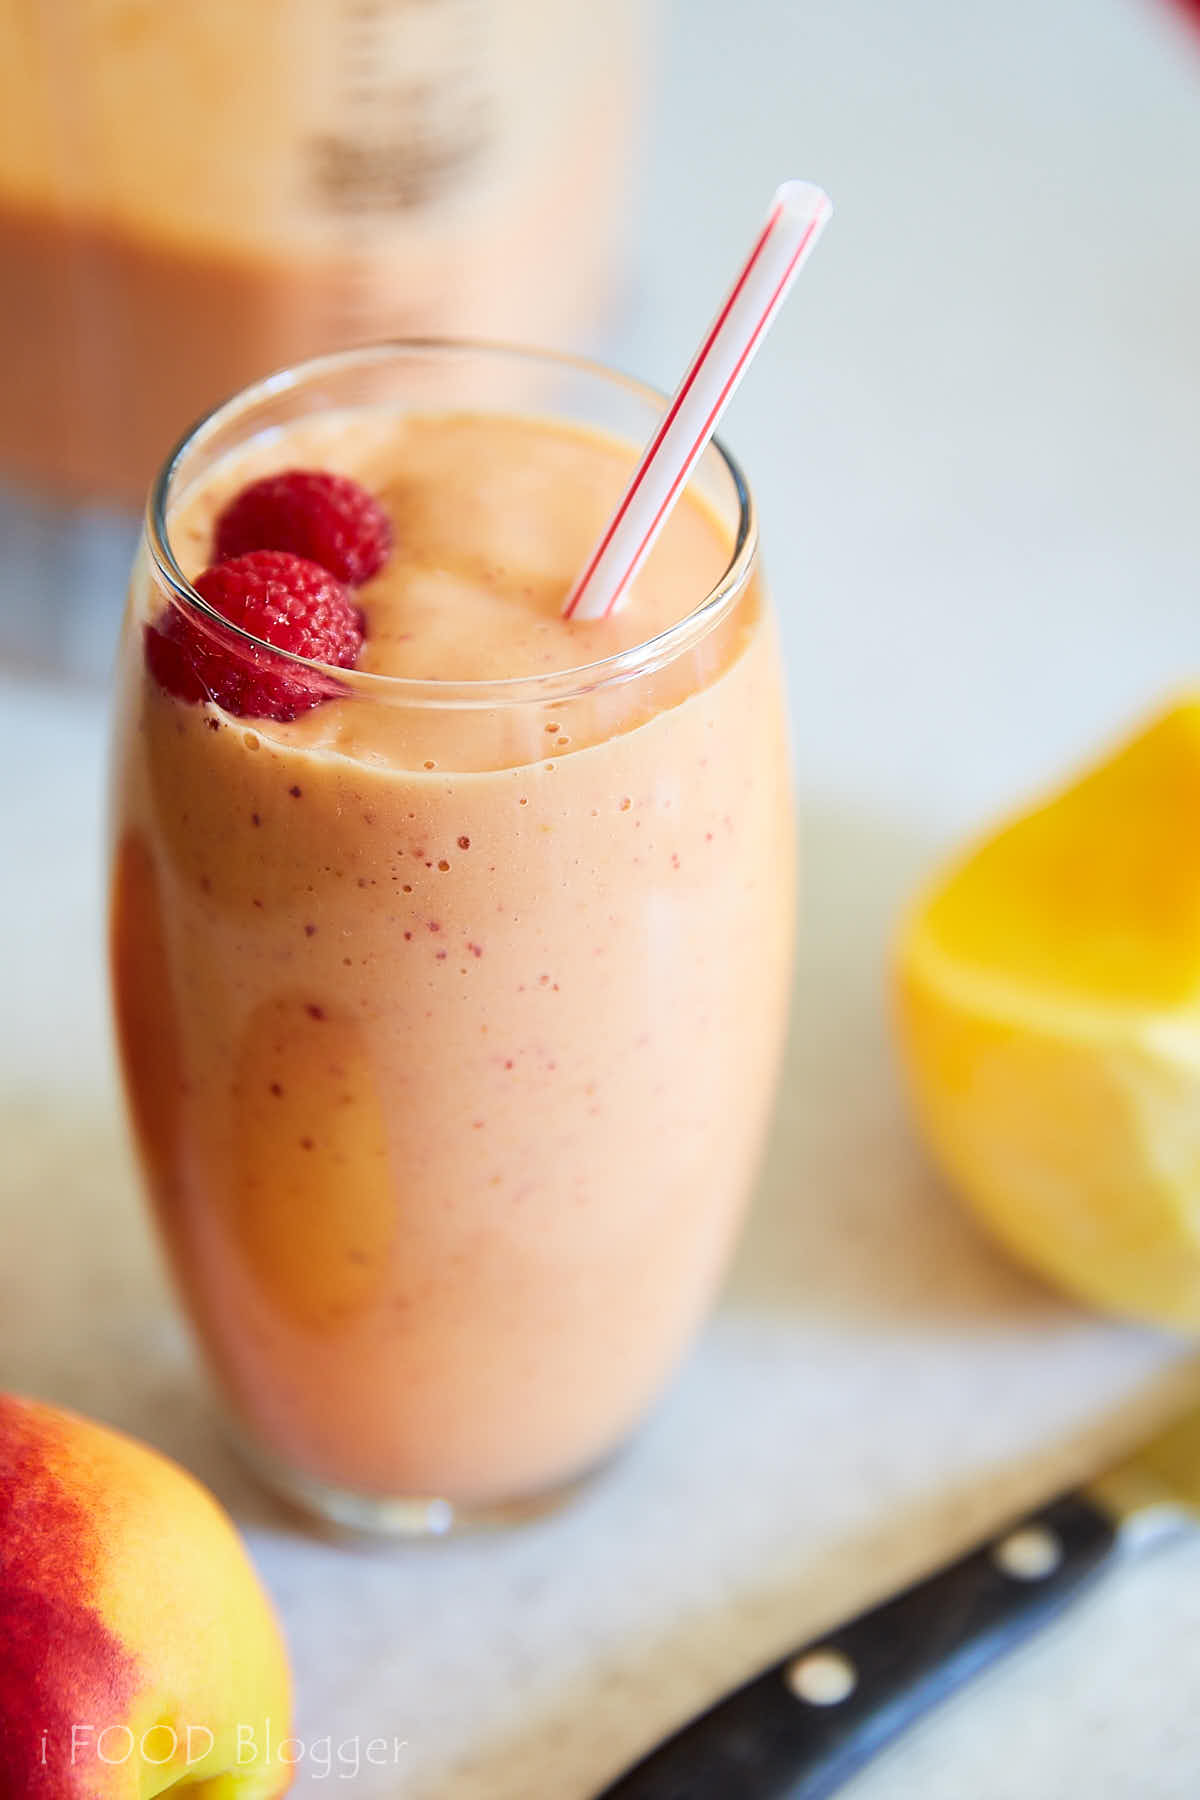 Peach Smoothie with Raspberries and Mango - i FOOD Blogger